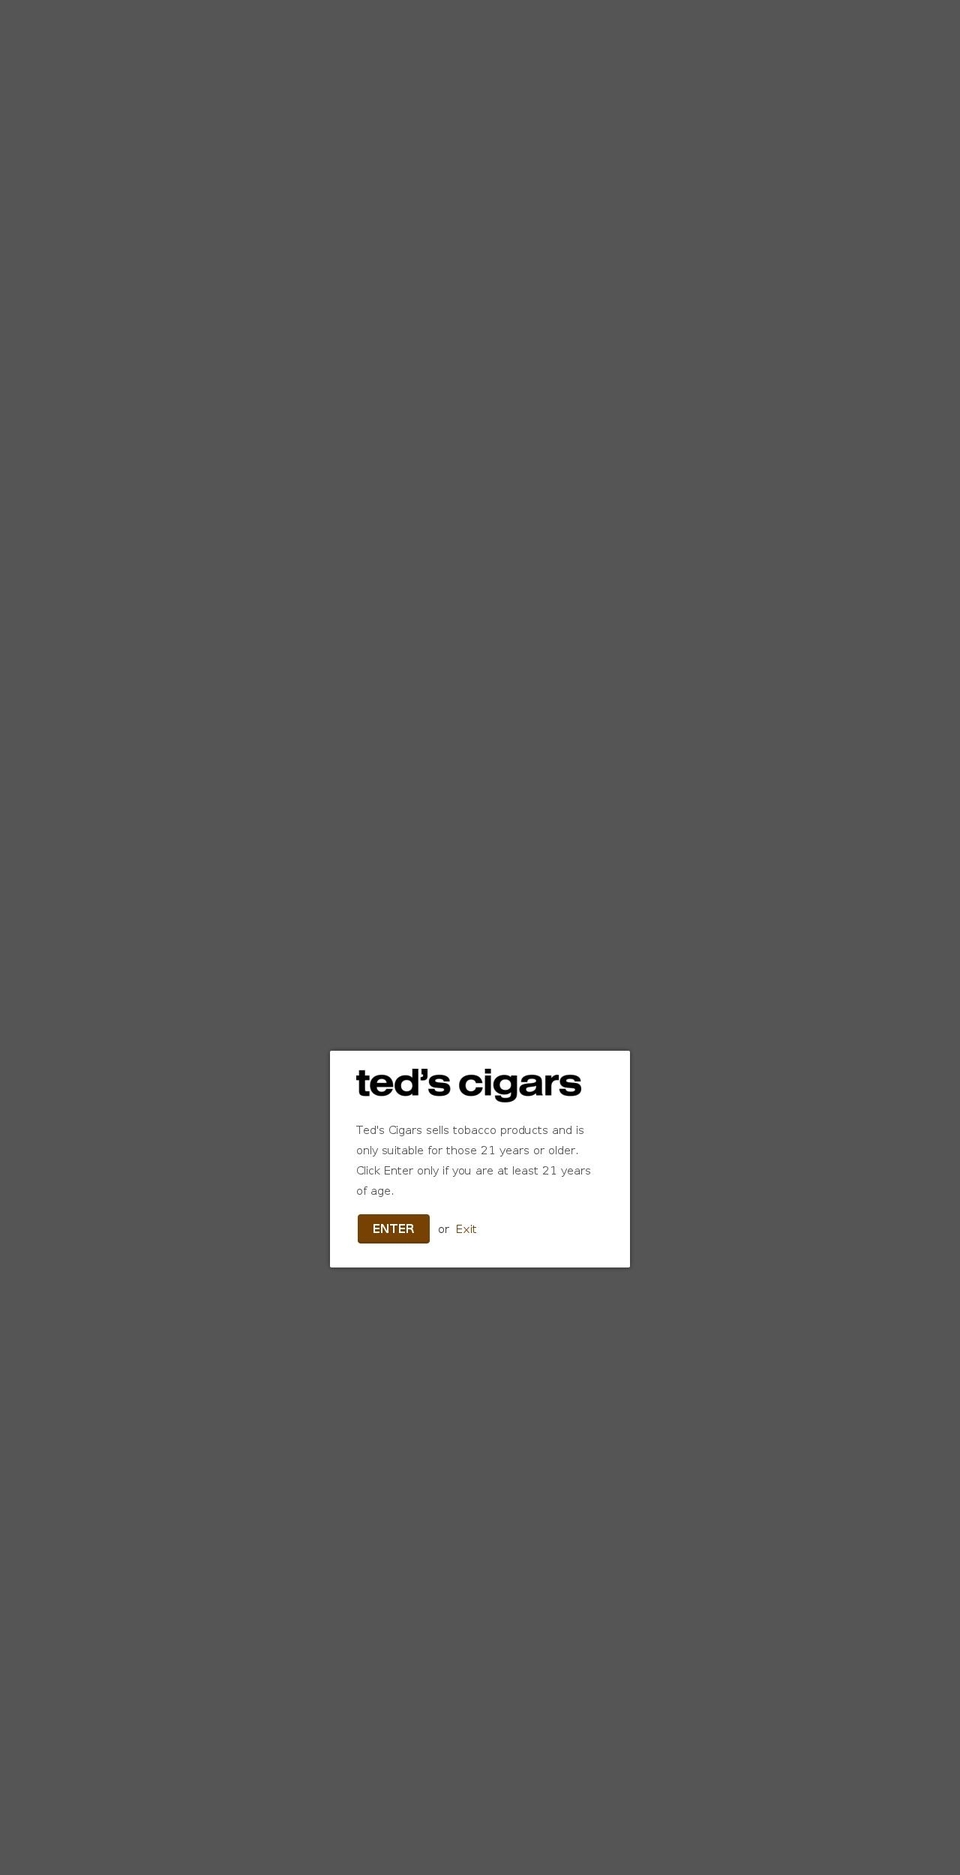 Be Yours Shopify theme site example tedscigars.com